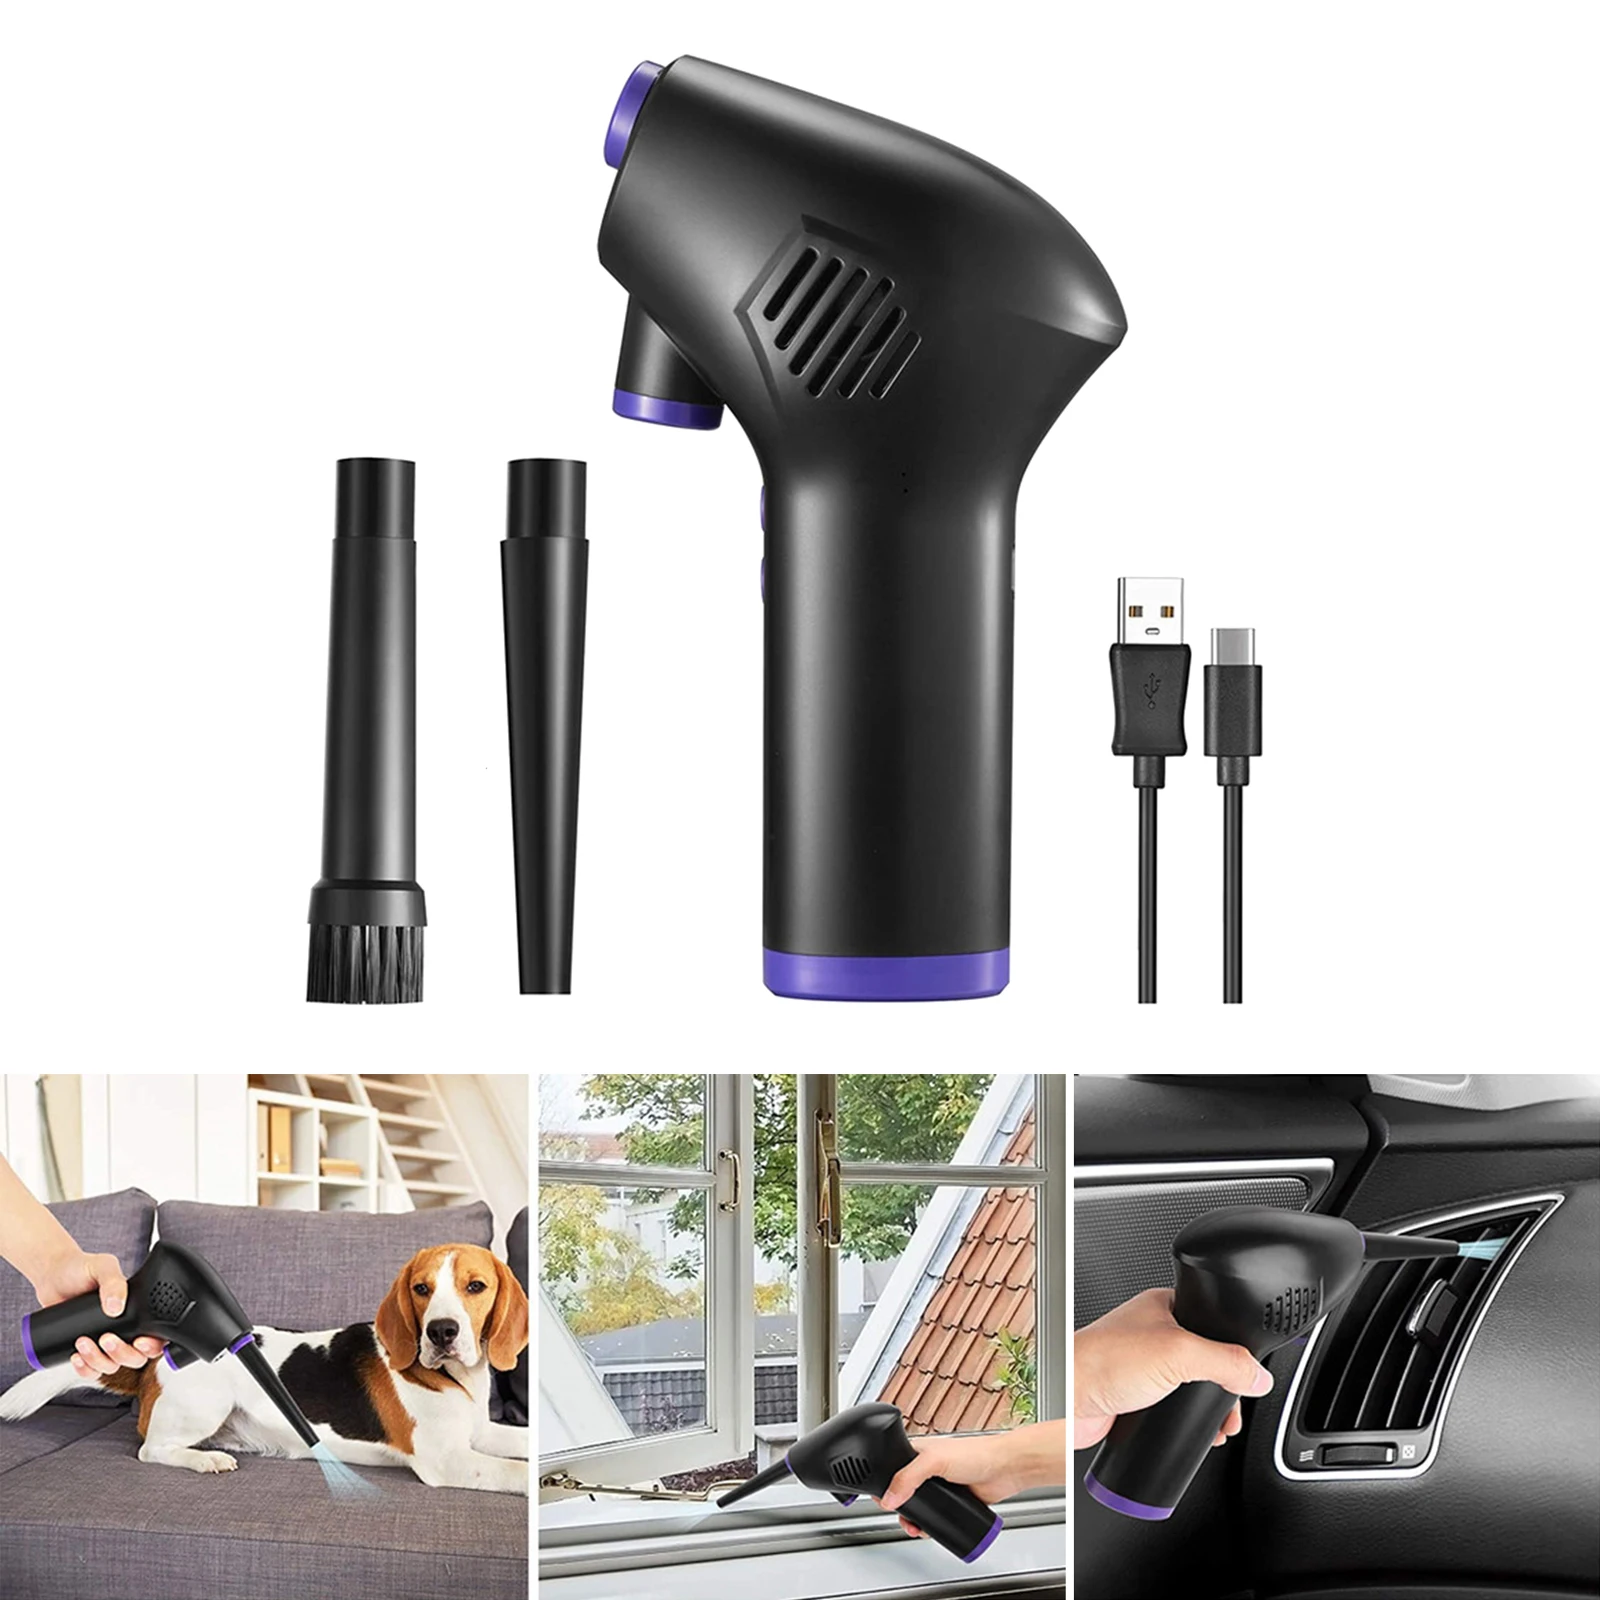 Electric Cordless Air Duster for Computer 45000RPM Fast Charging Handy Energy-Efficient Cleaner Blower